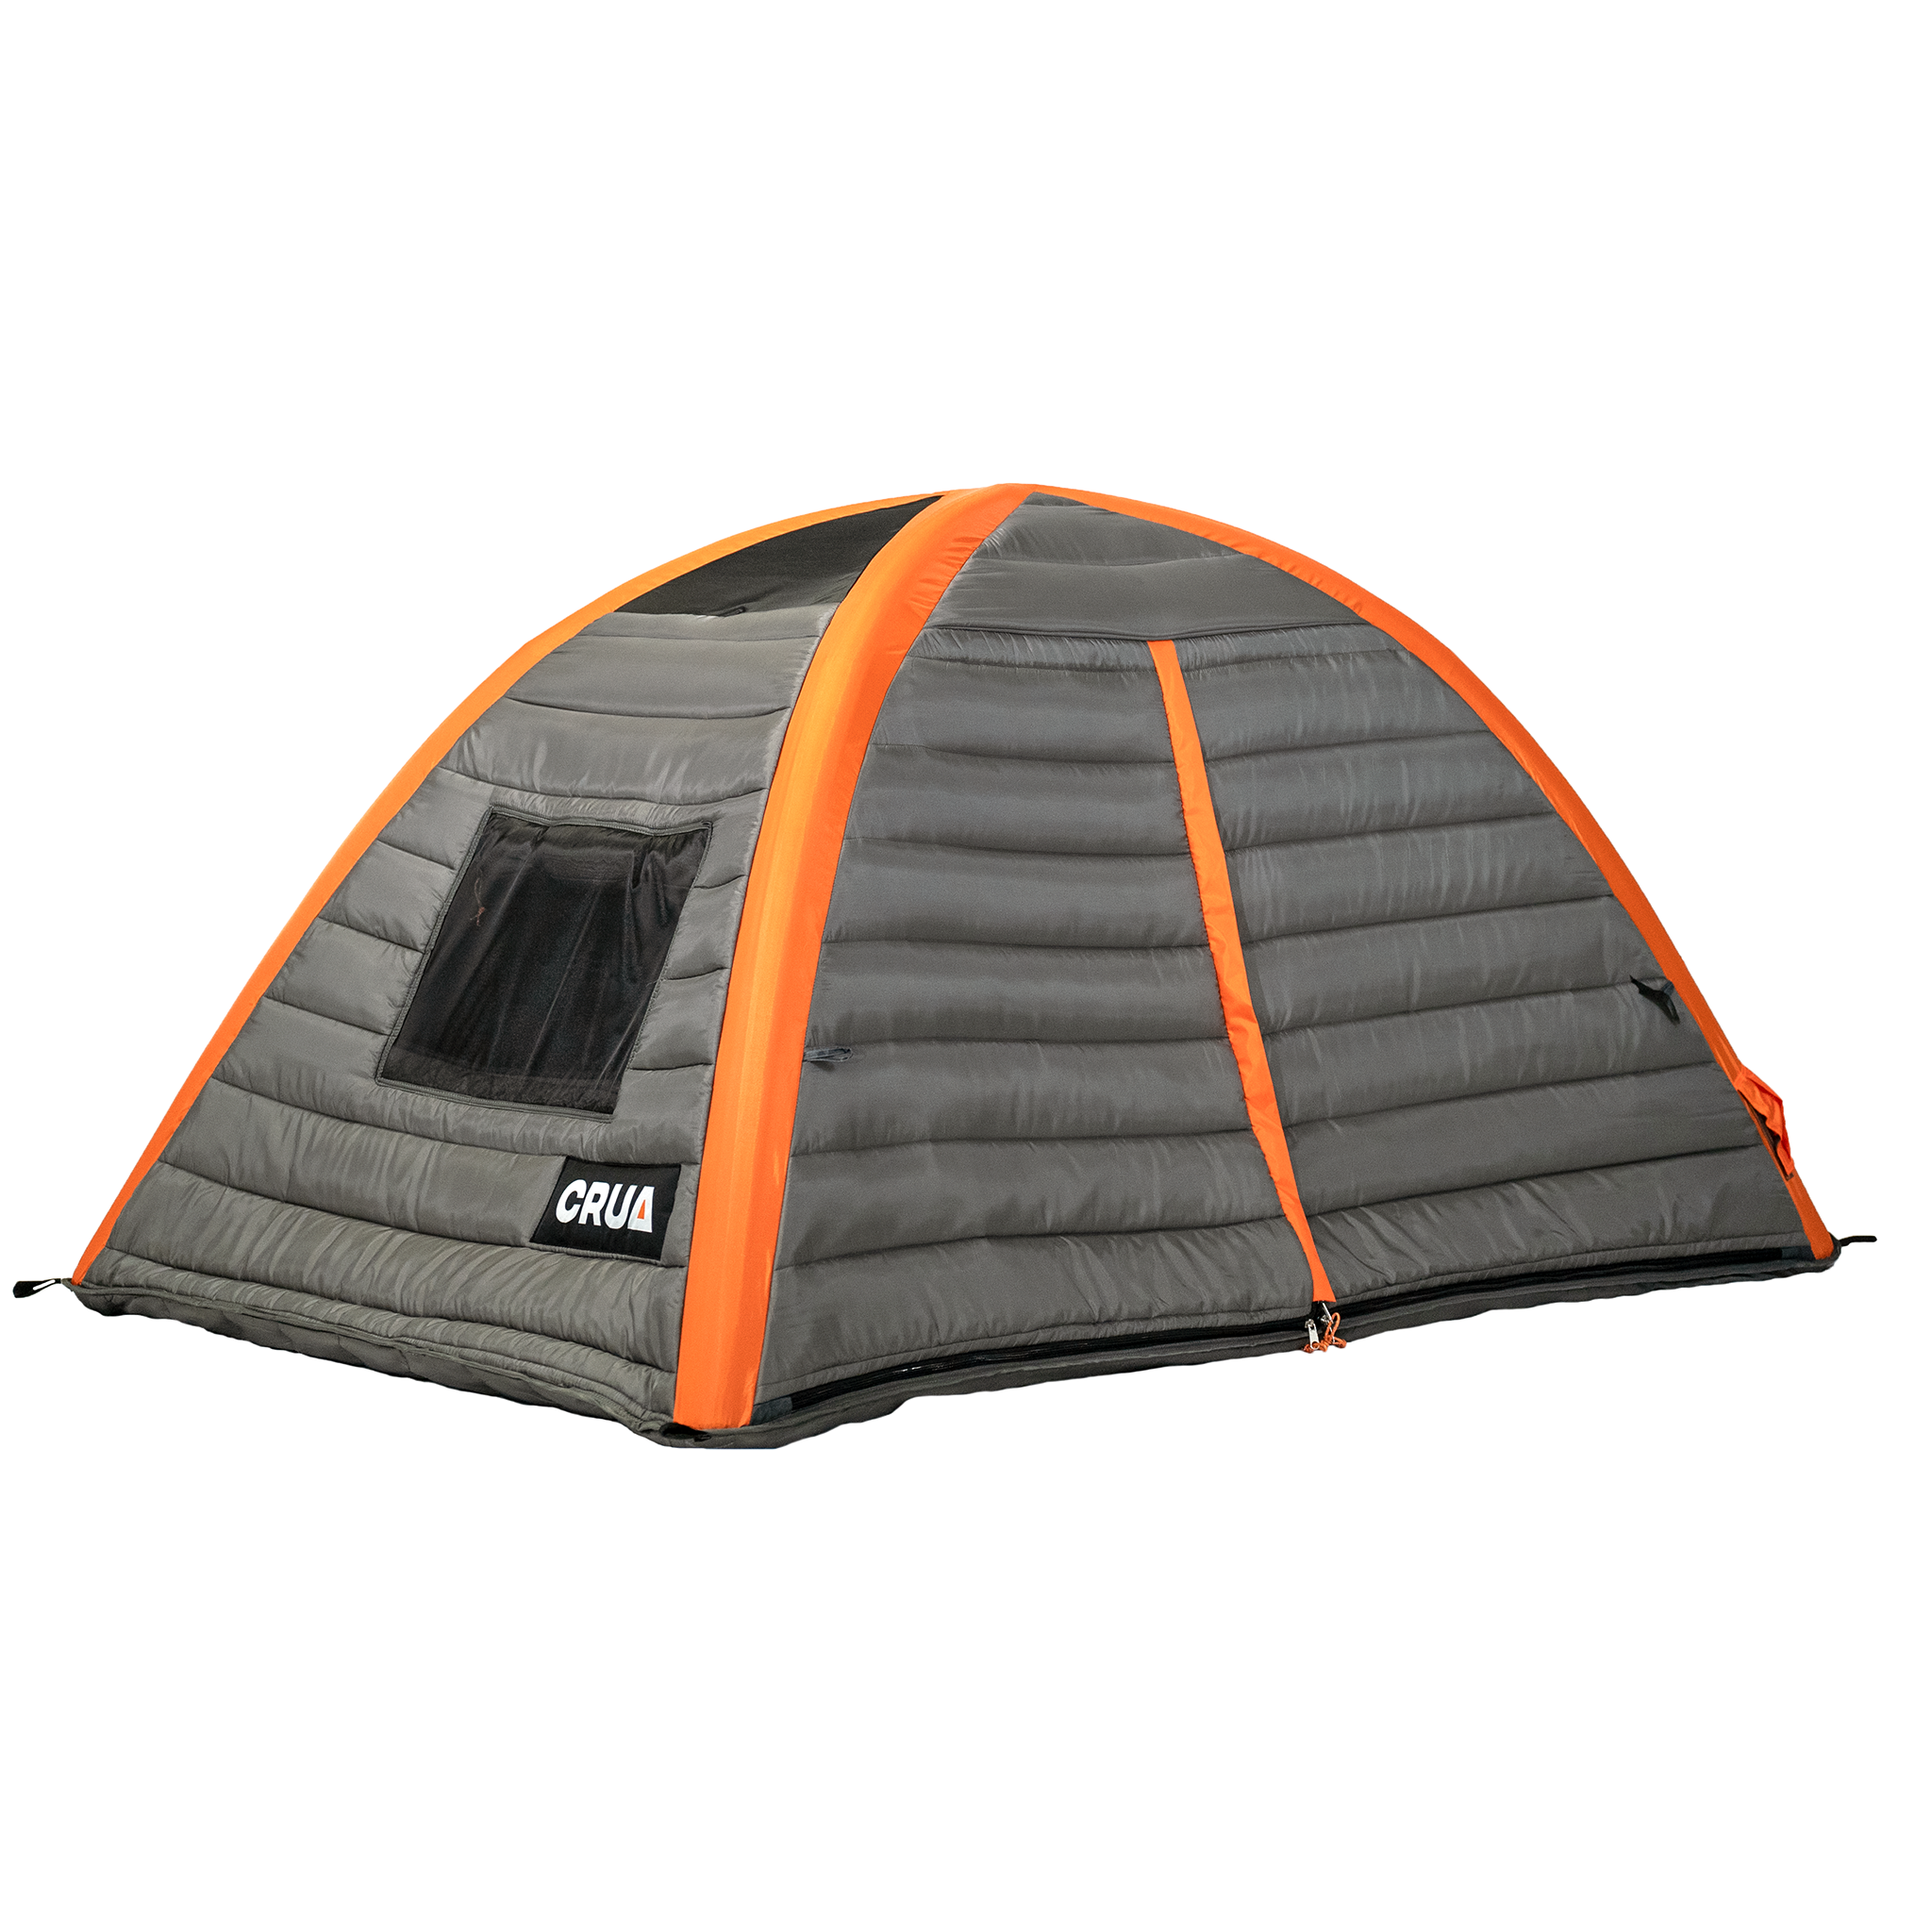 Culla | 2 Person Insulated Inner Tent